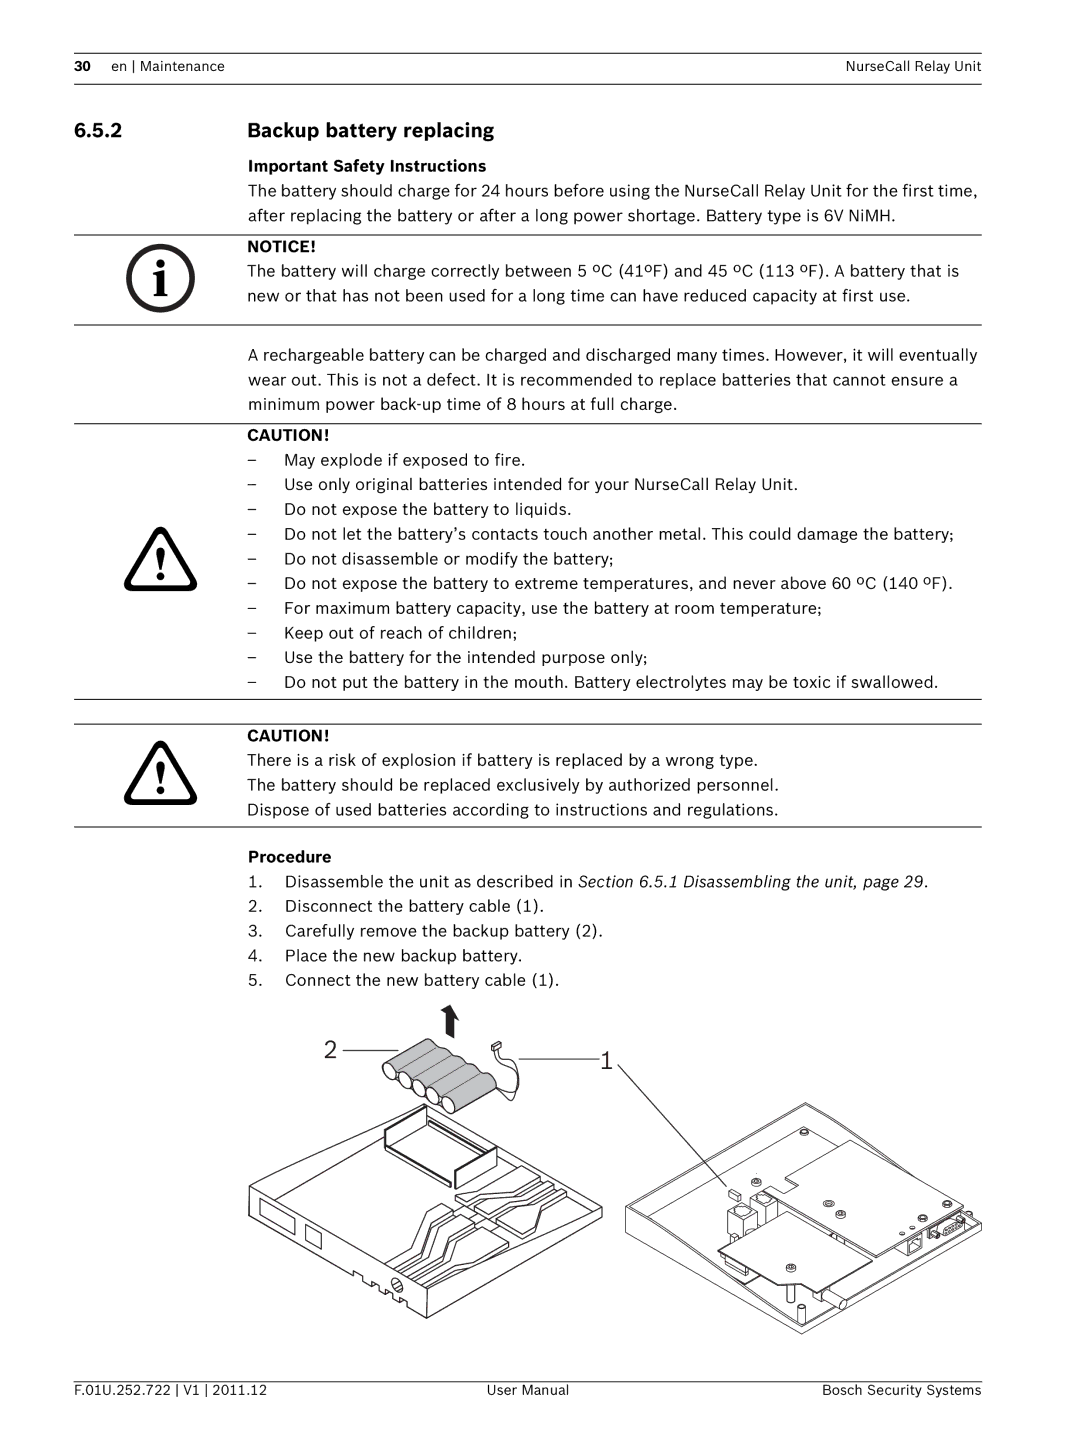 Bosch Appliances F.01U.252.722 user manual Backup battery replacing, Important Safety Instructions, Procedure 